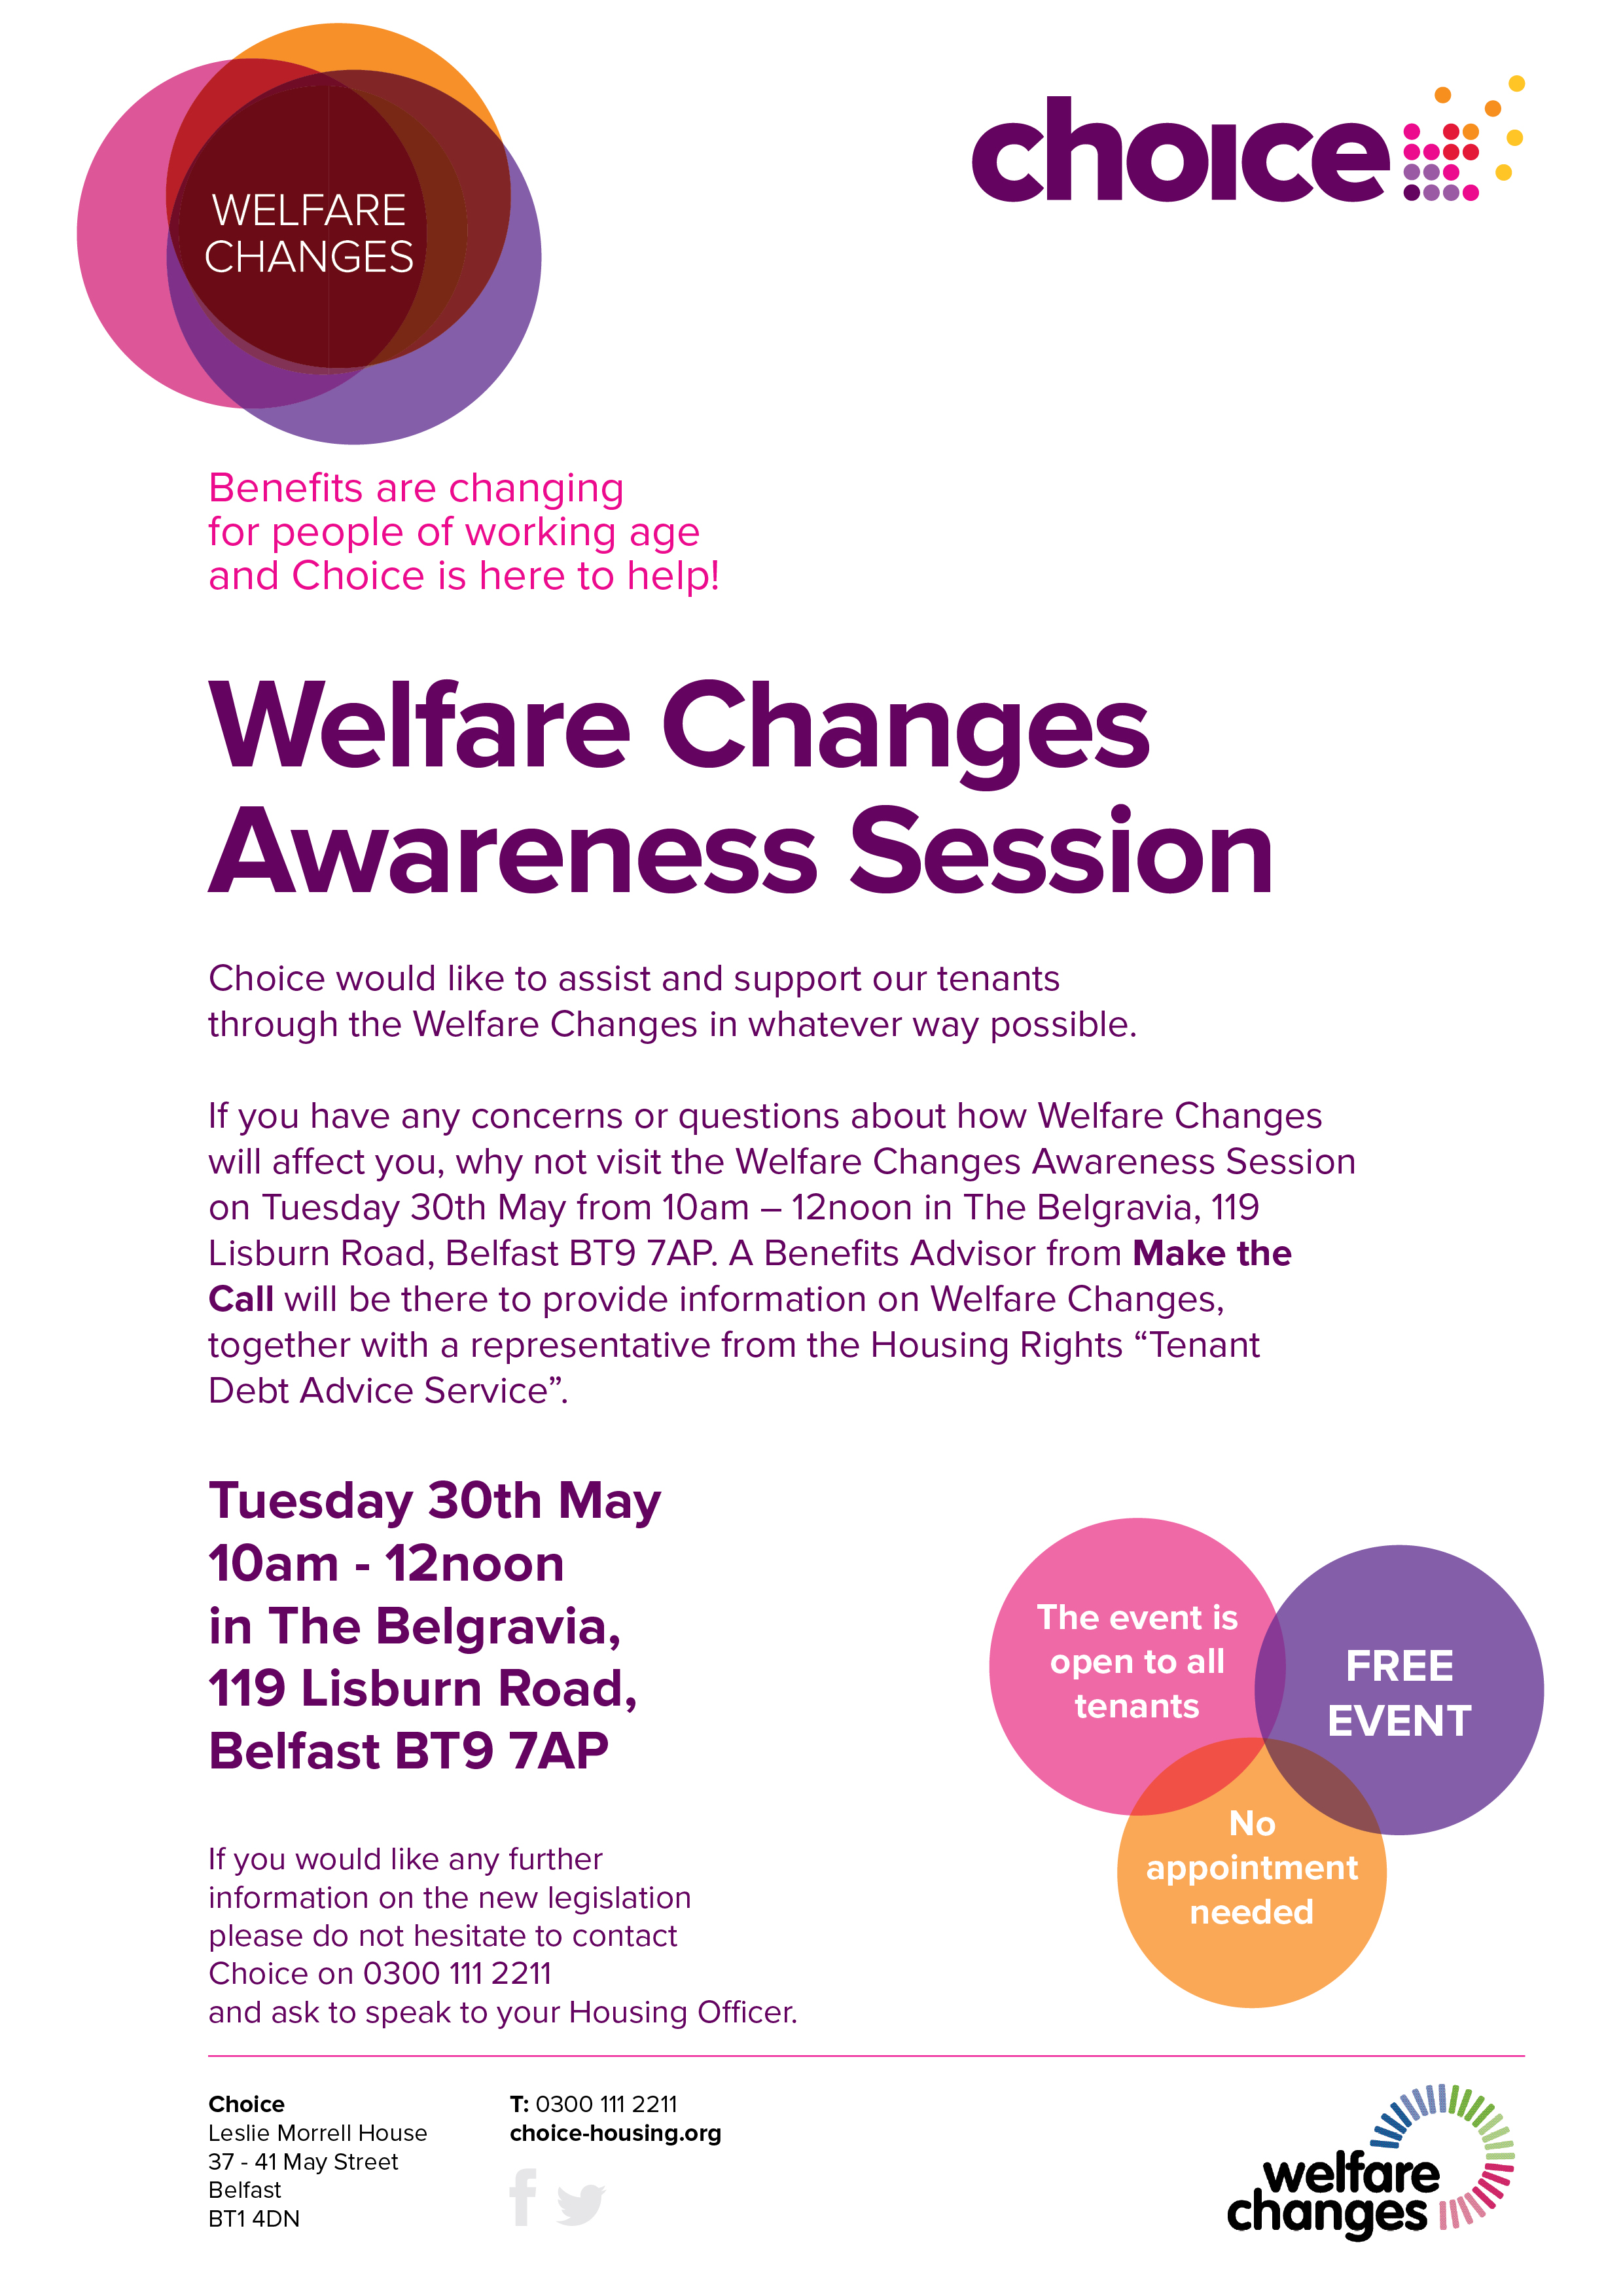 Welfare Changes Awareness Session - The Lisburn Road